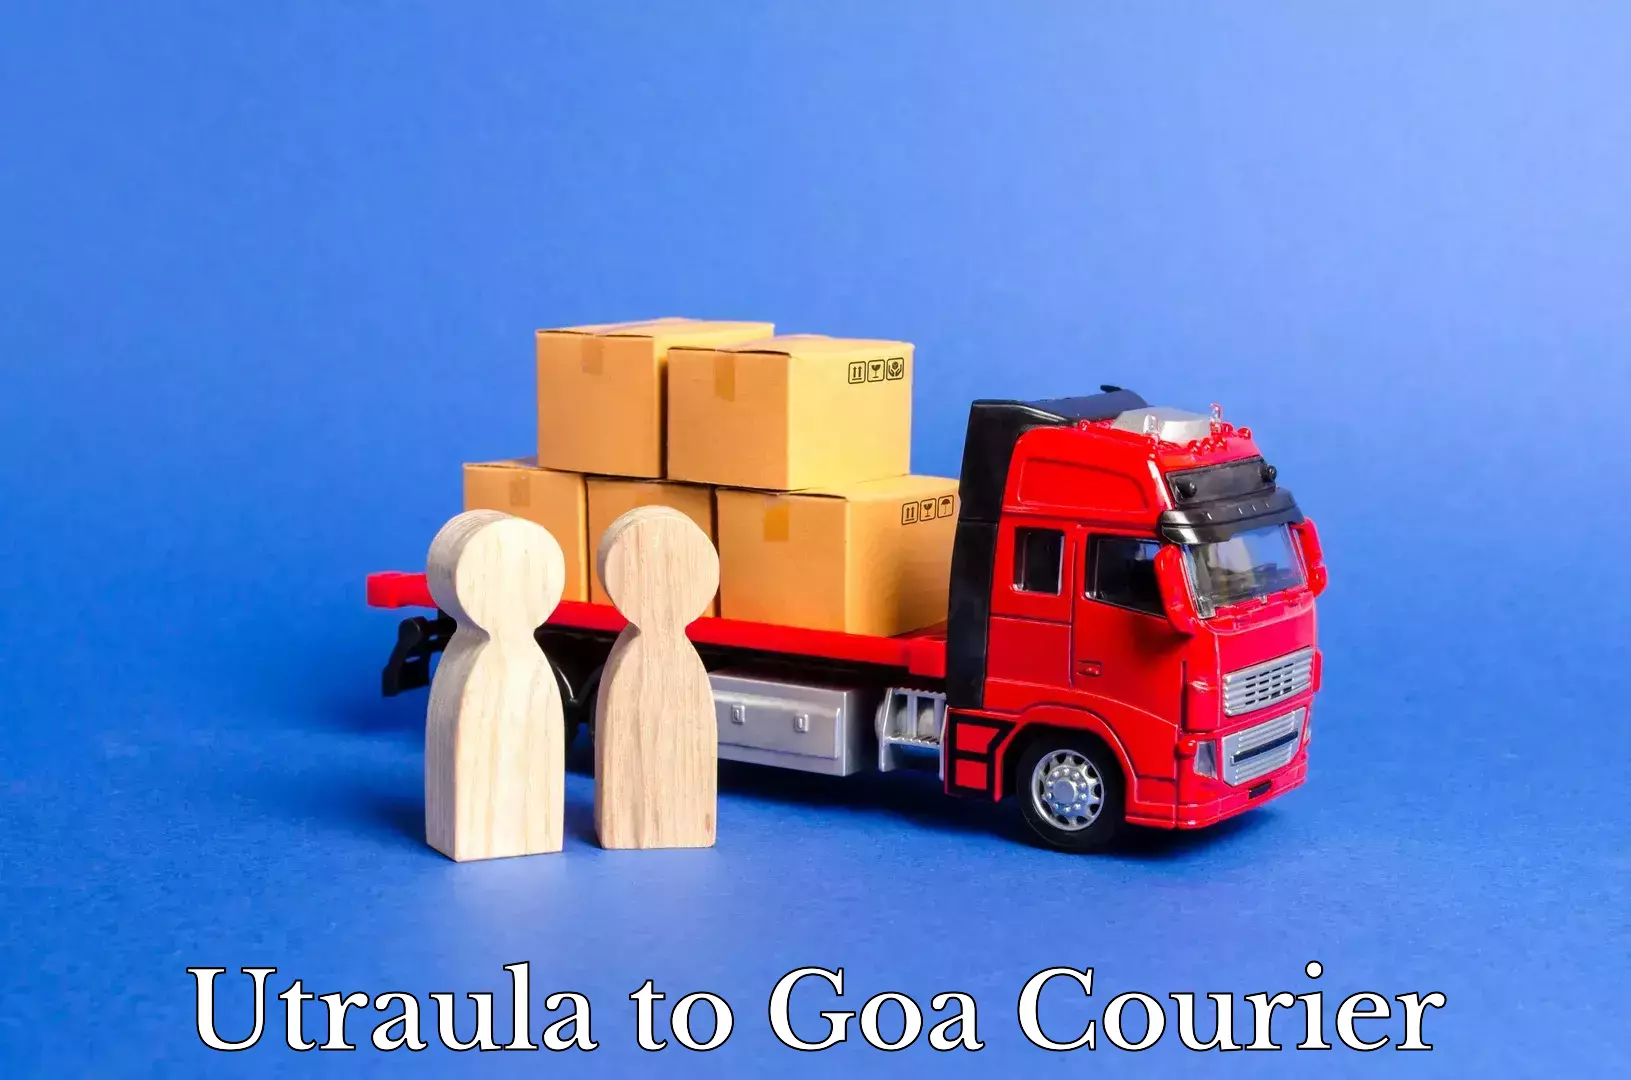 Automated shipping processes in Utraula to Goa